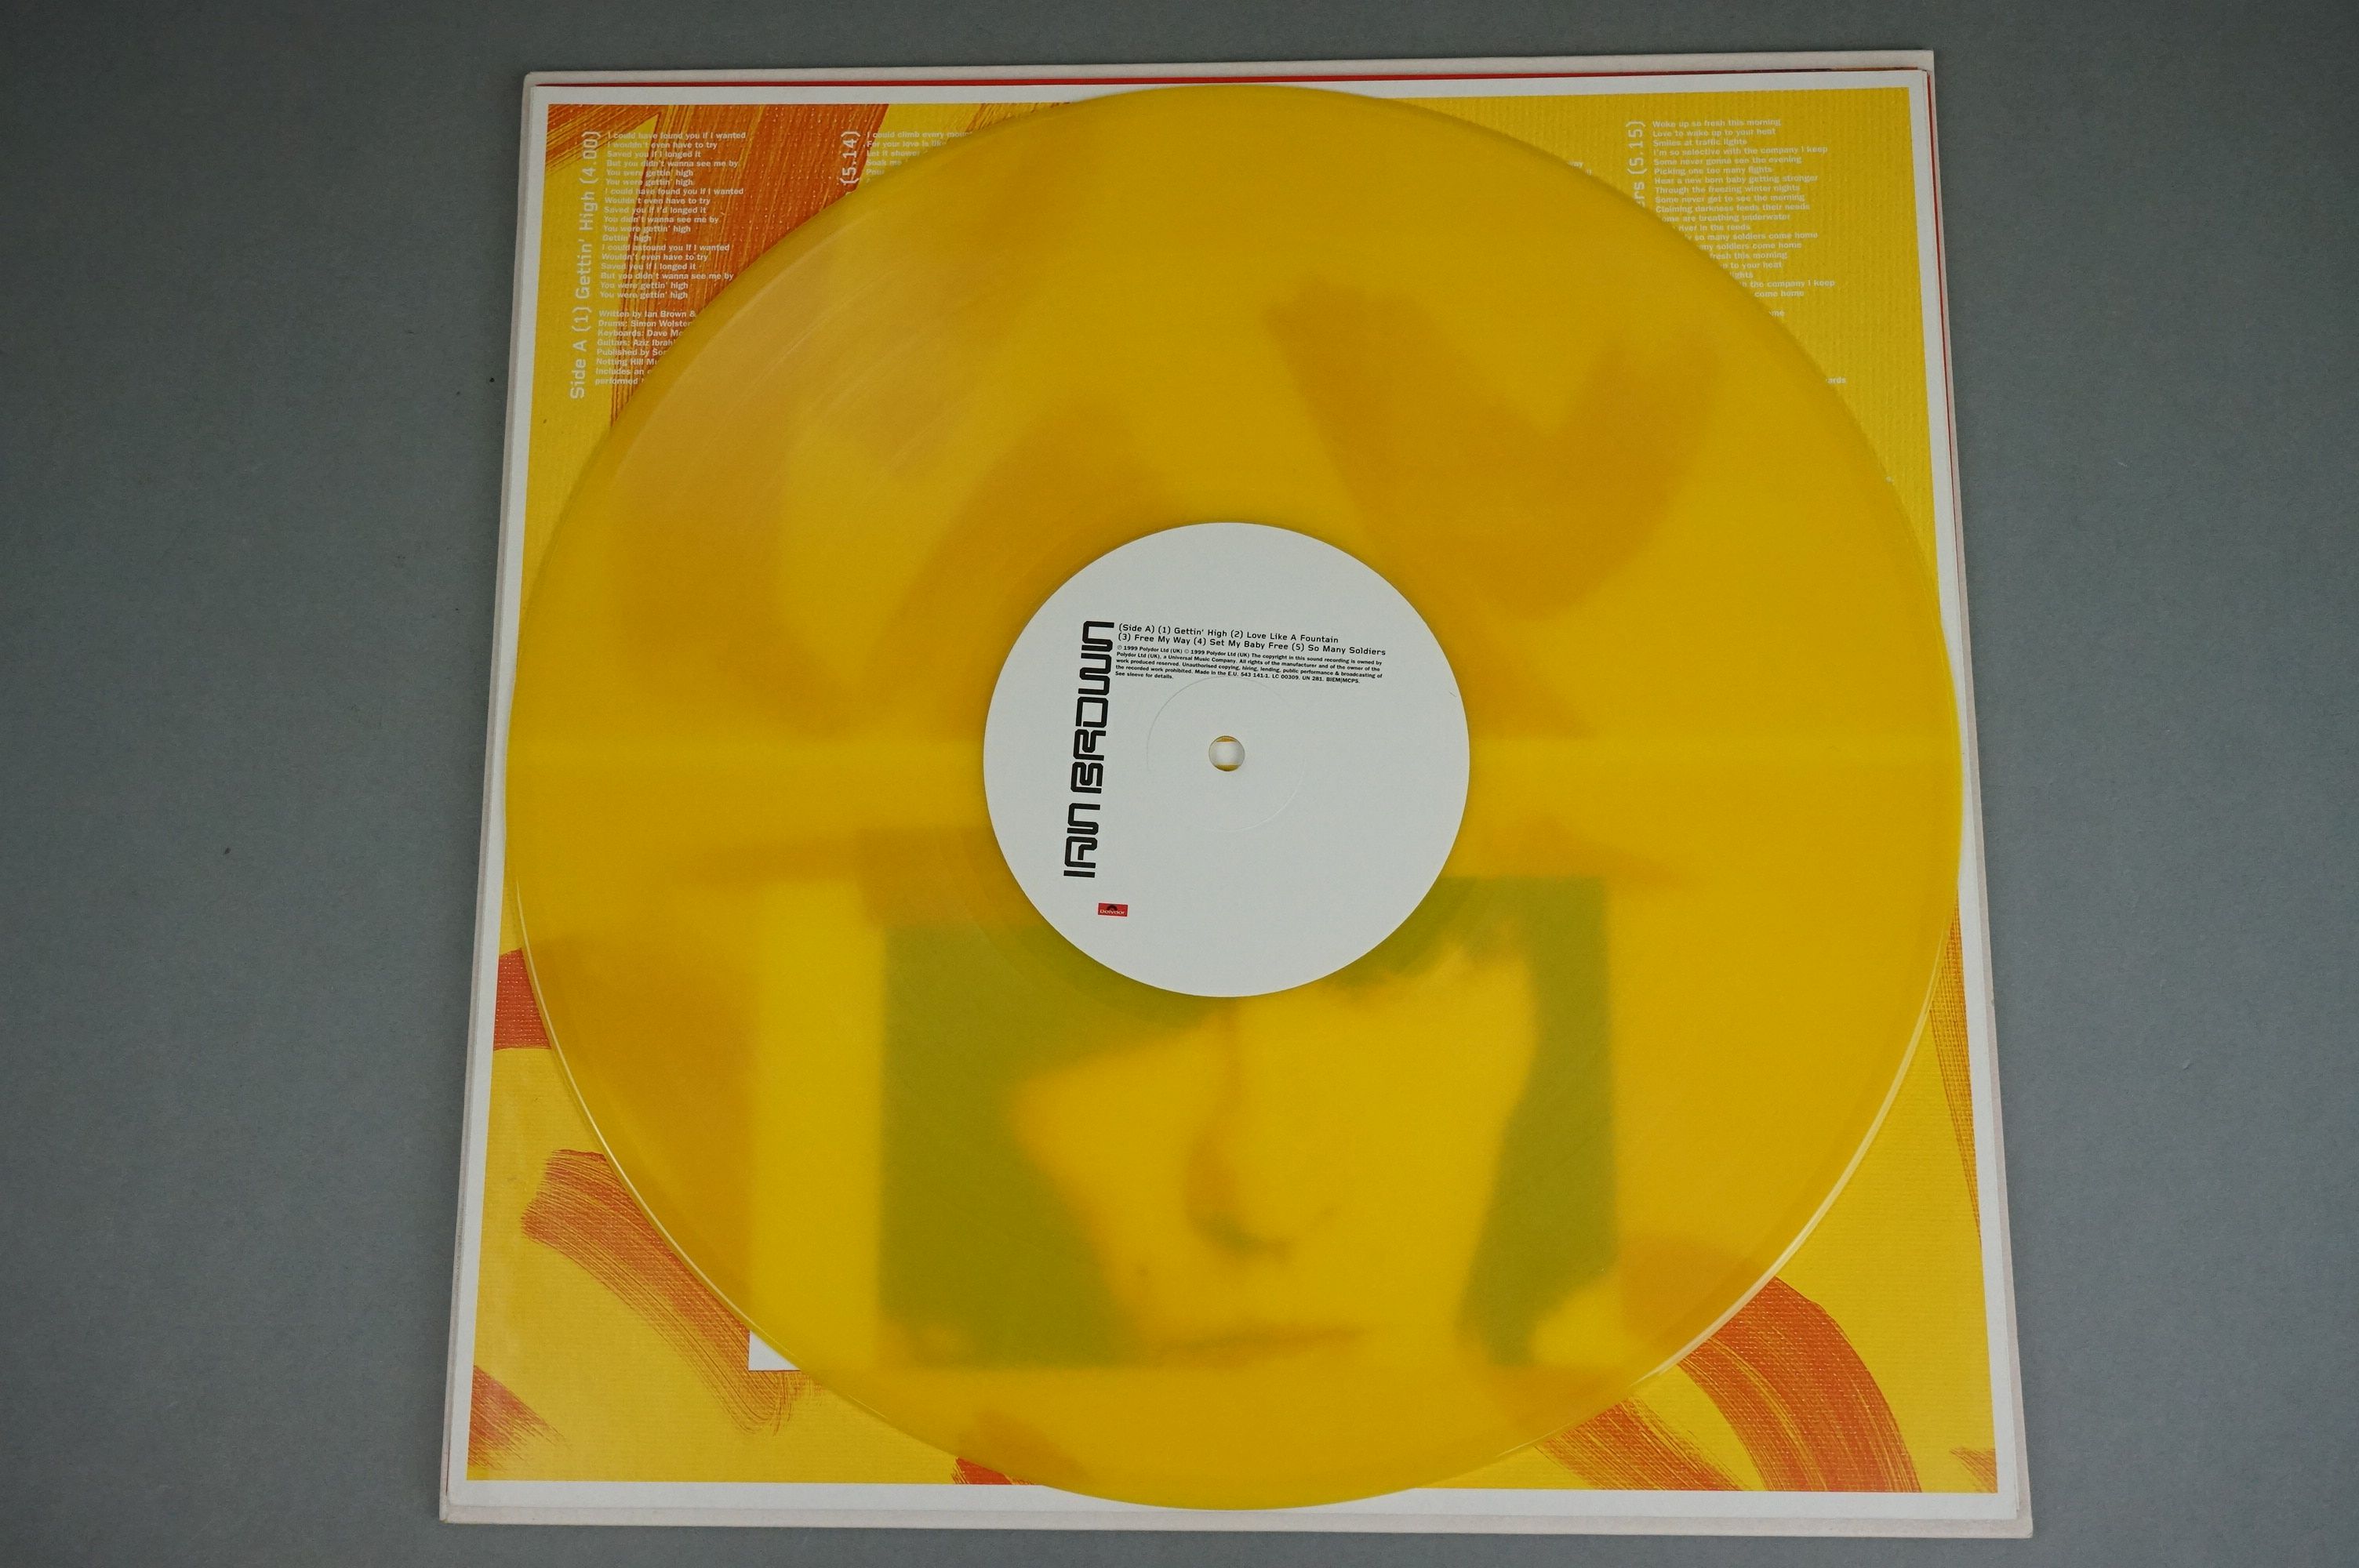 Vinyl - Two Ian Brown LPs on Polydor to include Unfinished Monkey Business 539916-1 ltd edn gatefold - Image 8 of 12